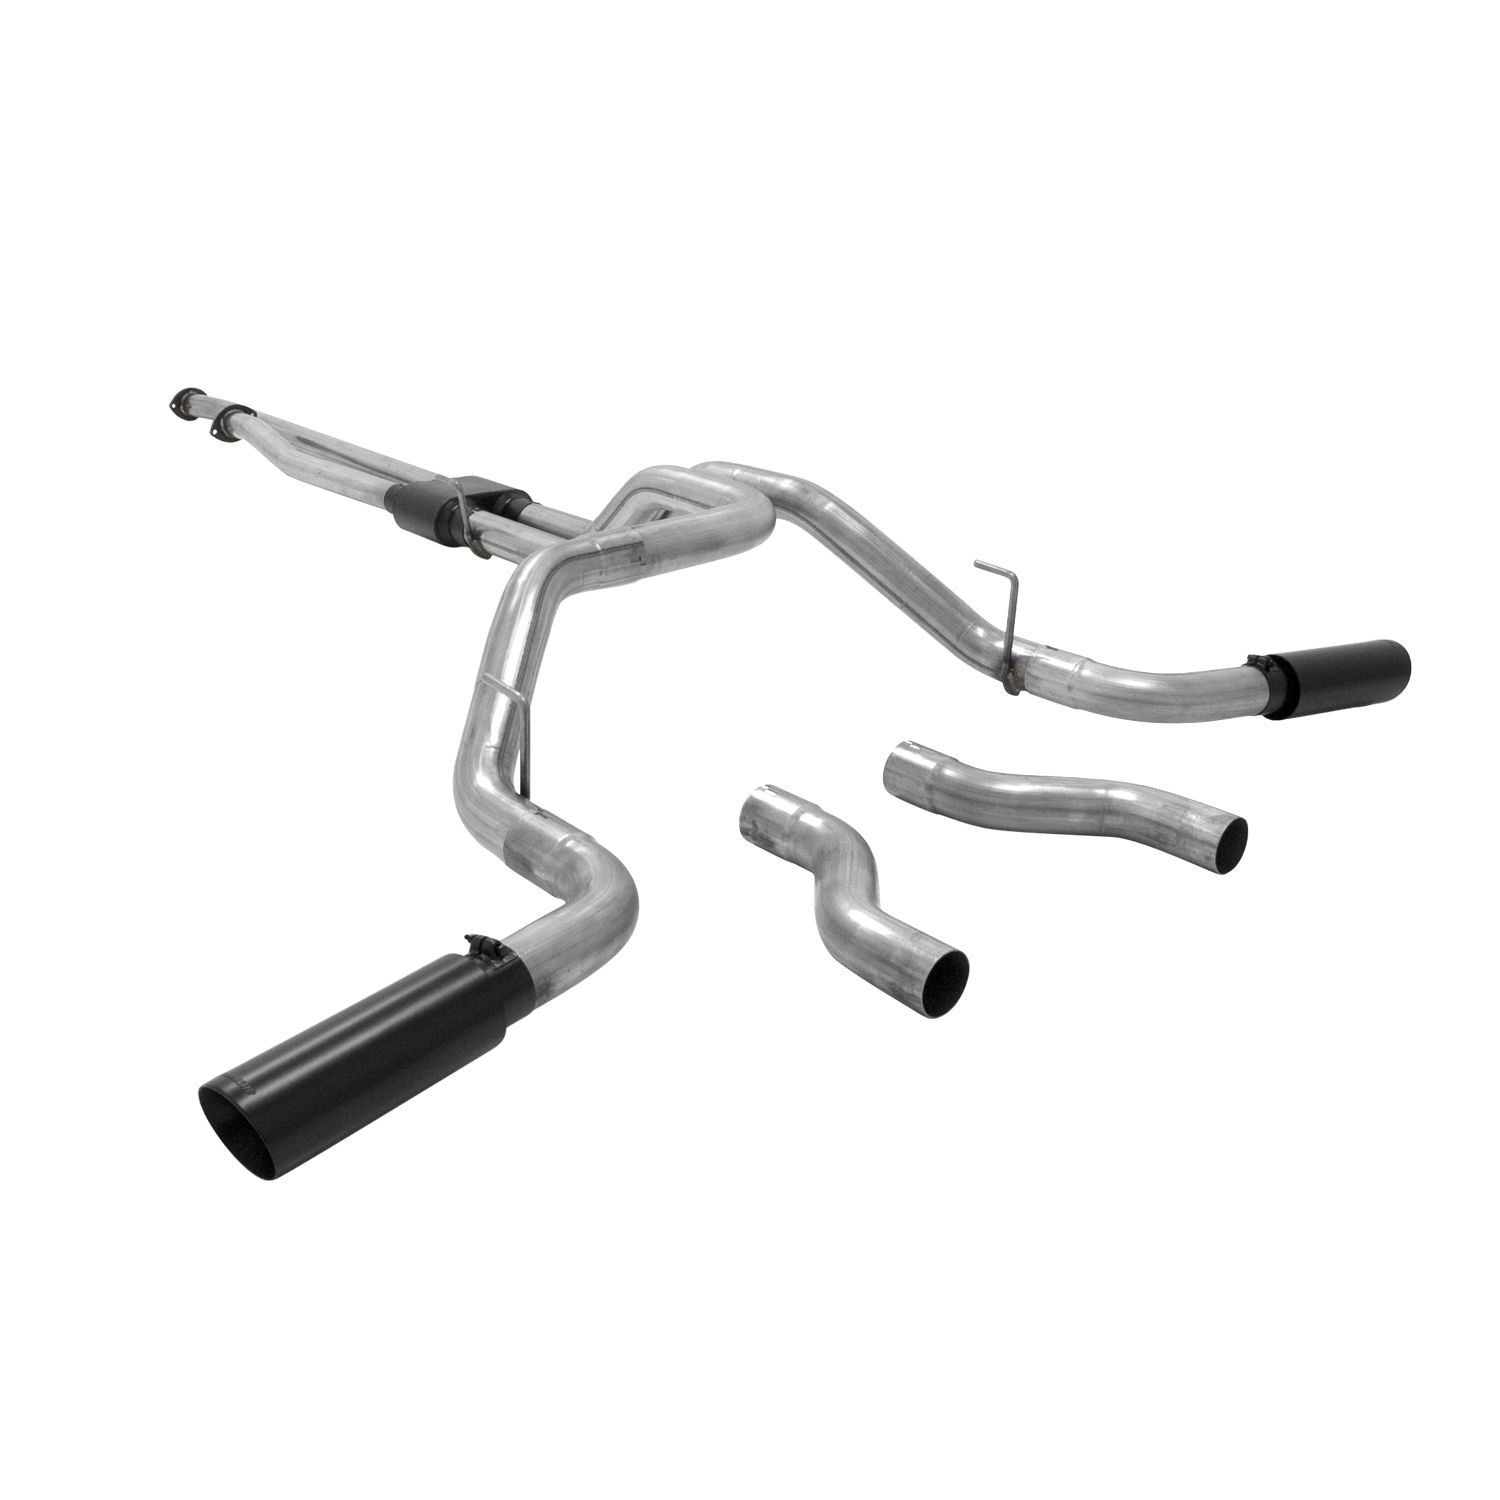 2017 Toyota Tundra TRD Pro 5.7L Flowmaster Outlaw Cat-Back Exhaust - 817692